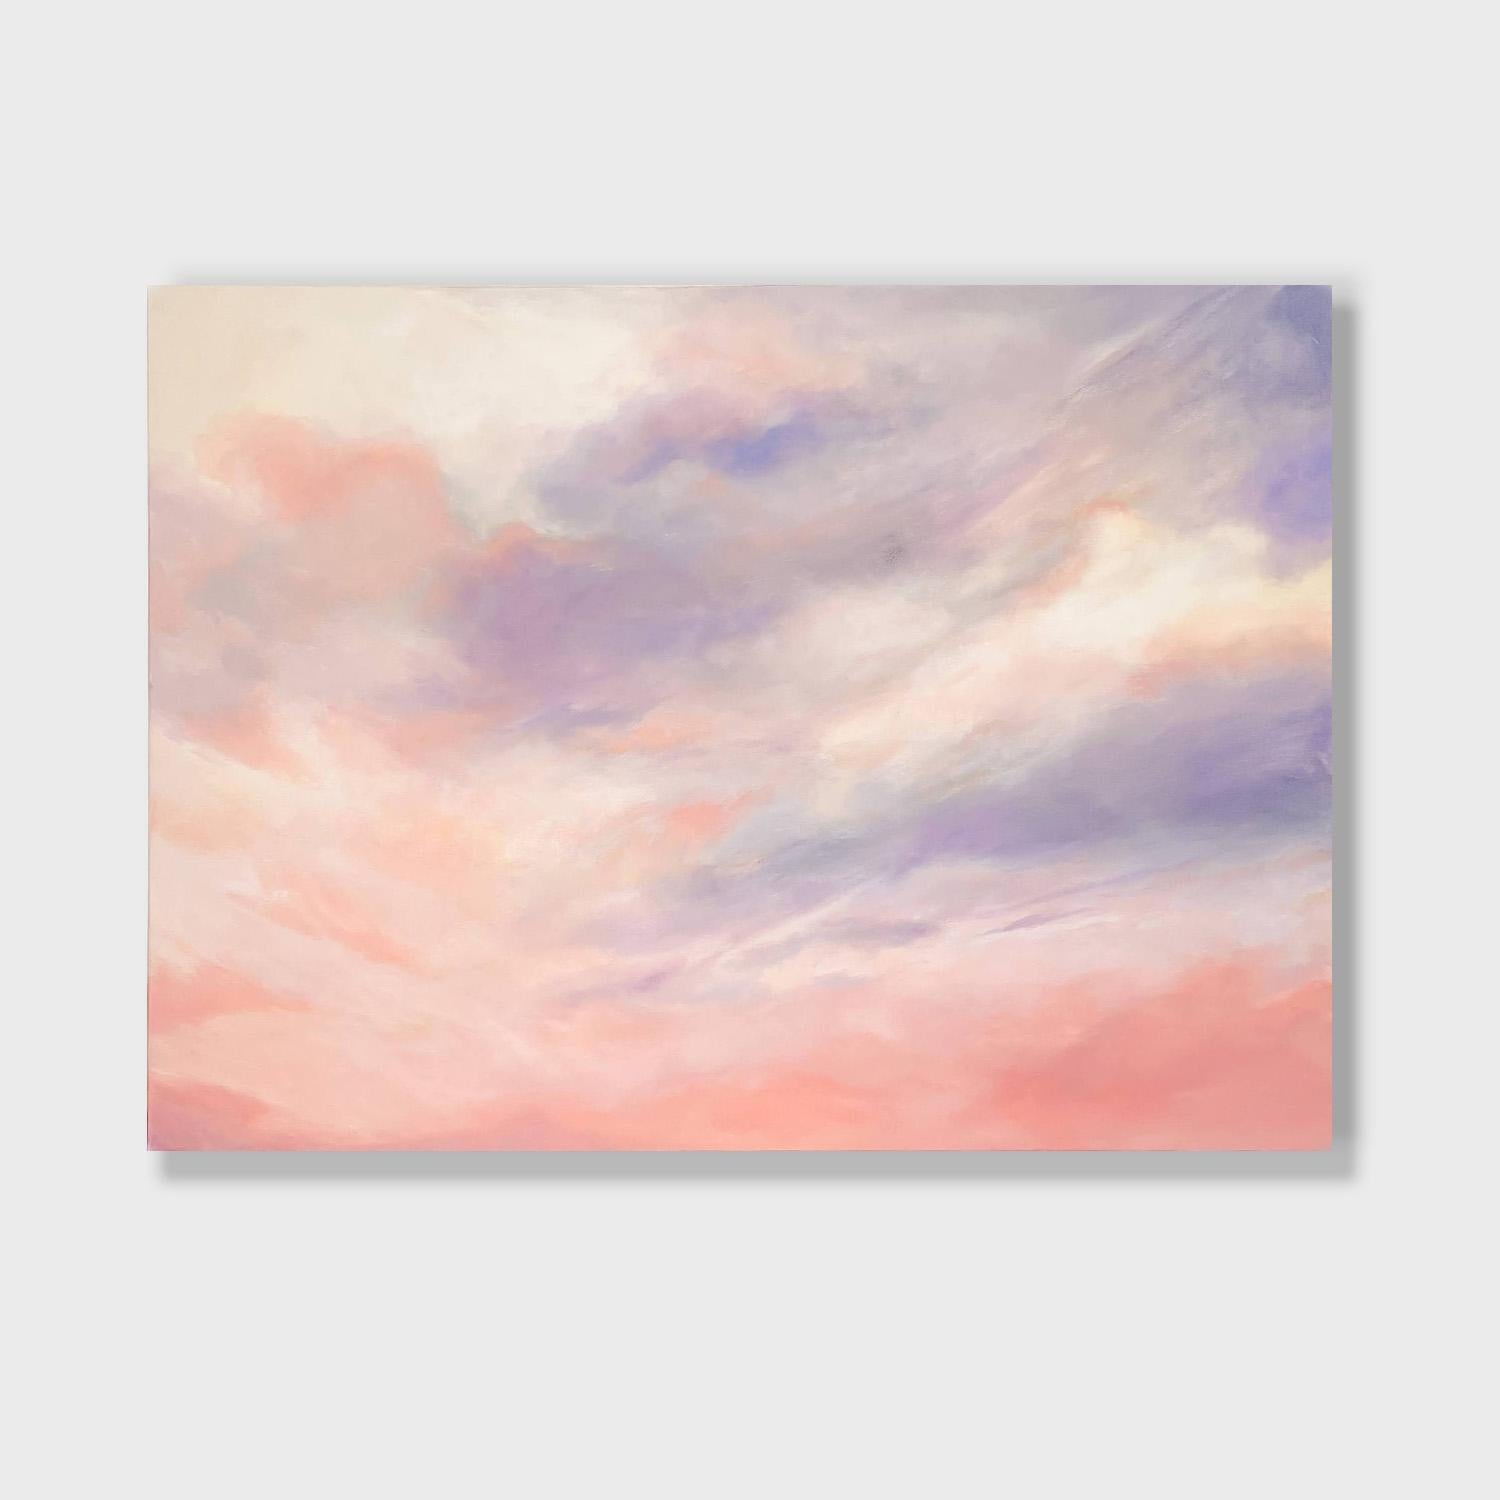 Stefanie Bales Abstract Painting - An Impressionist Acrylic on Canvas Painting, "Cloud Dreams"